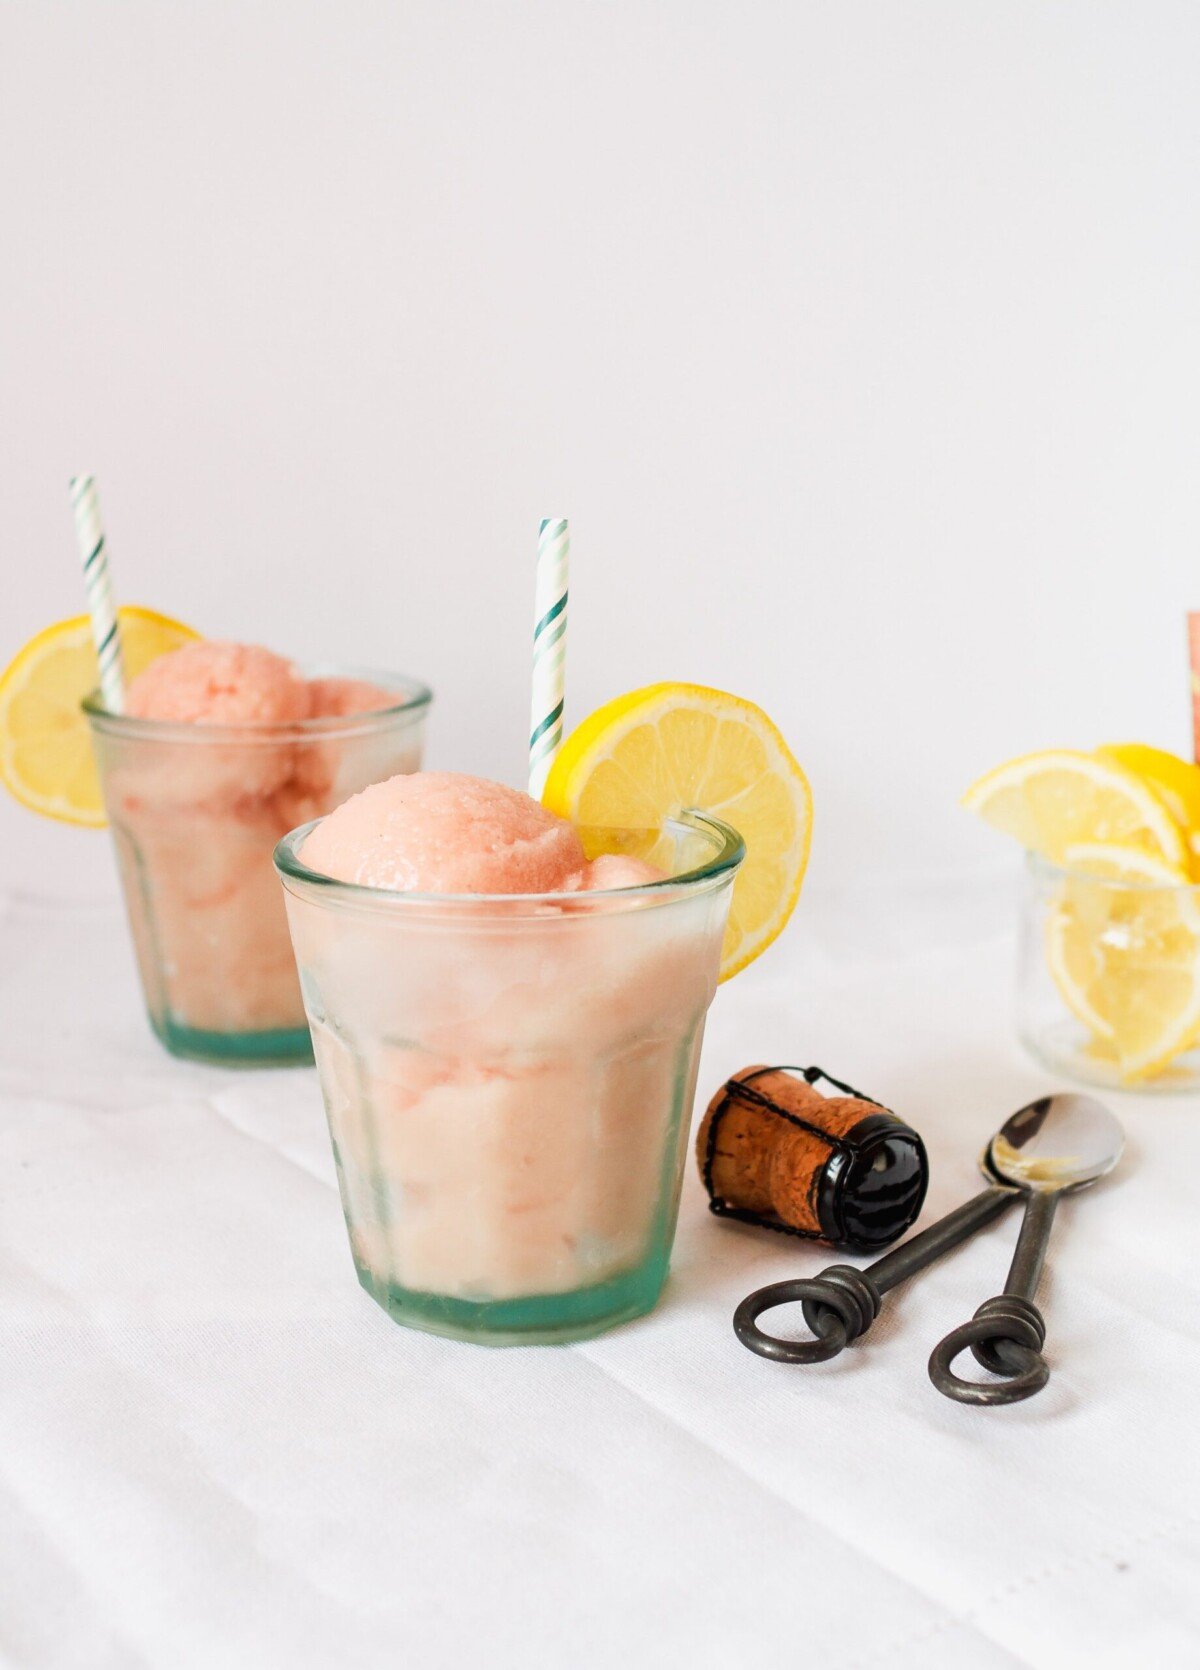 Scoops of rhubarb ice in glasses with lemon slices and spoons. 